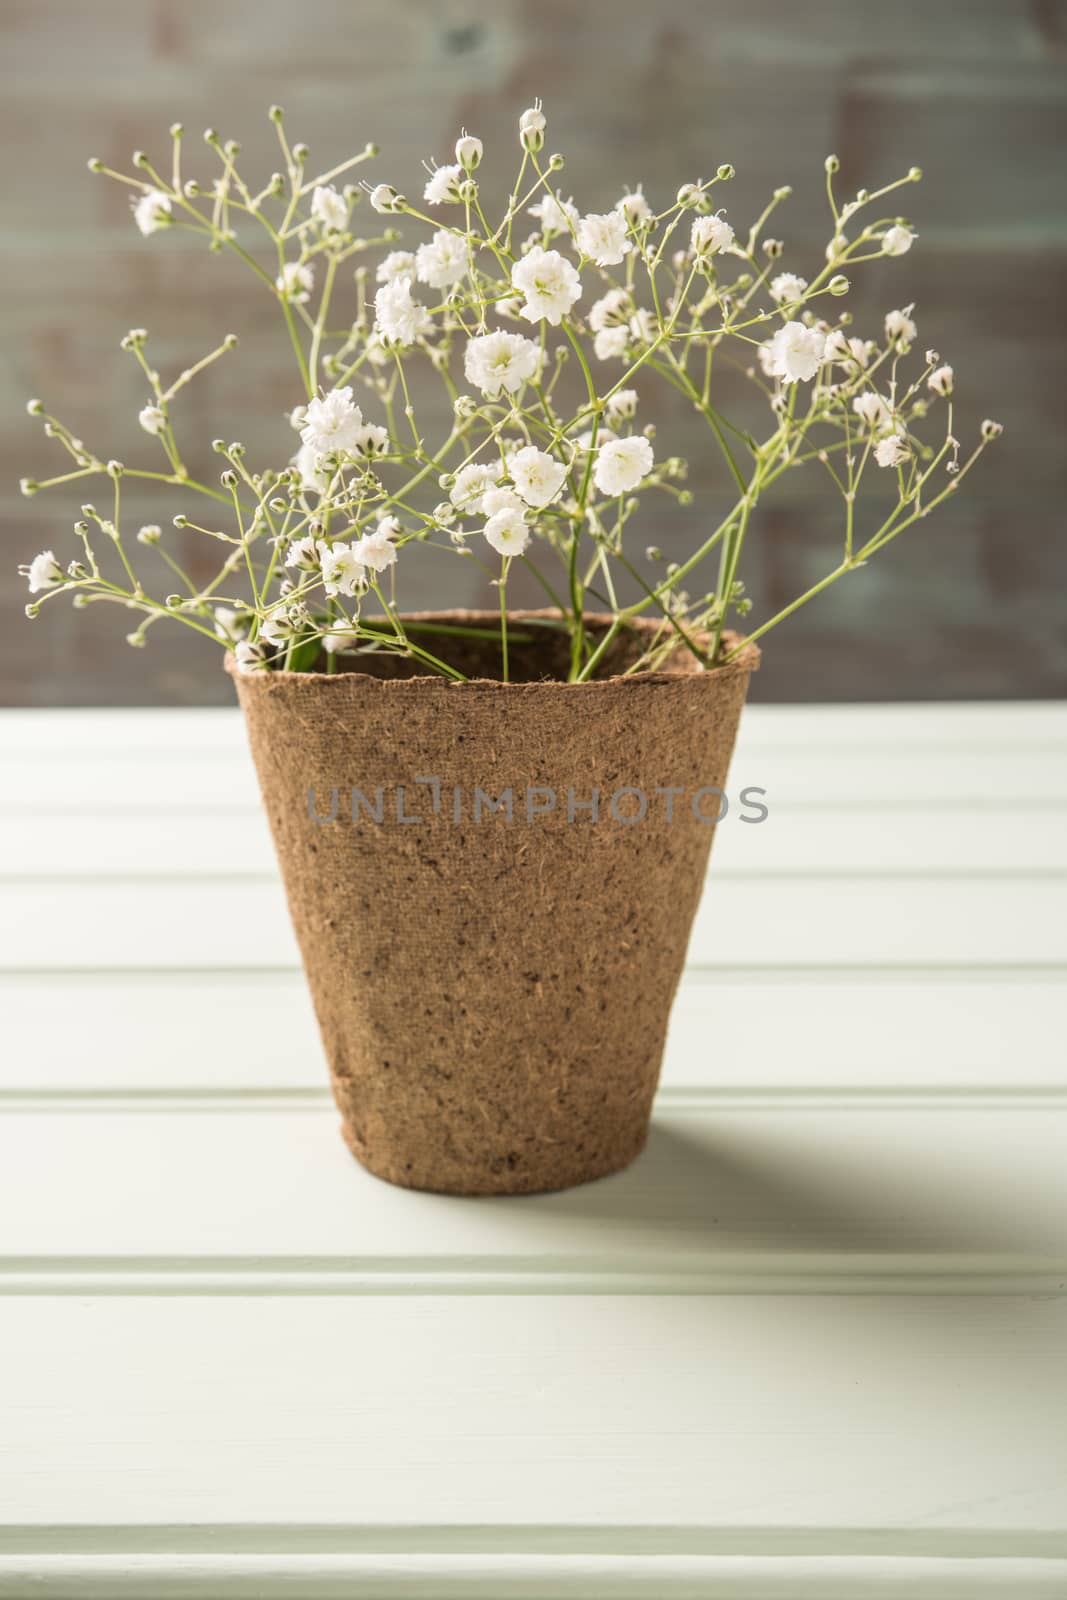 A bouquet of gypsophila flowers on the wooden table. Vintage sty by AnaMarques